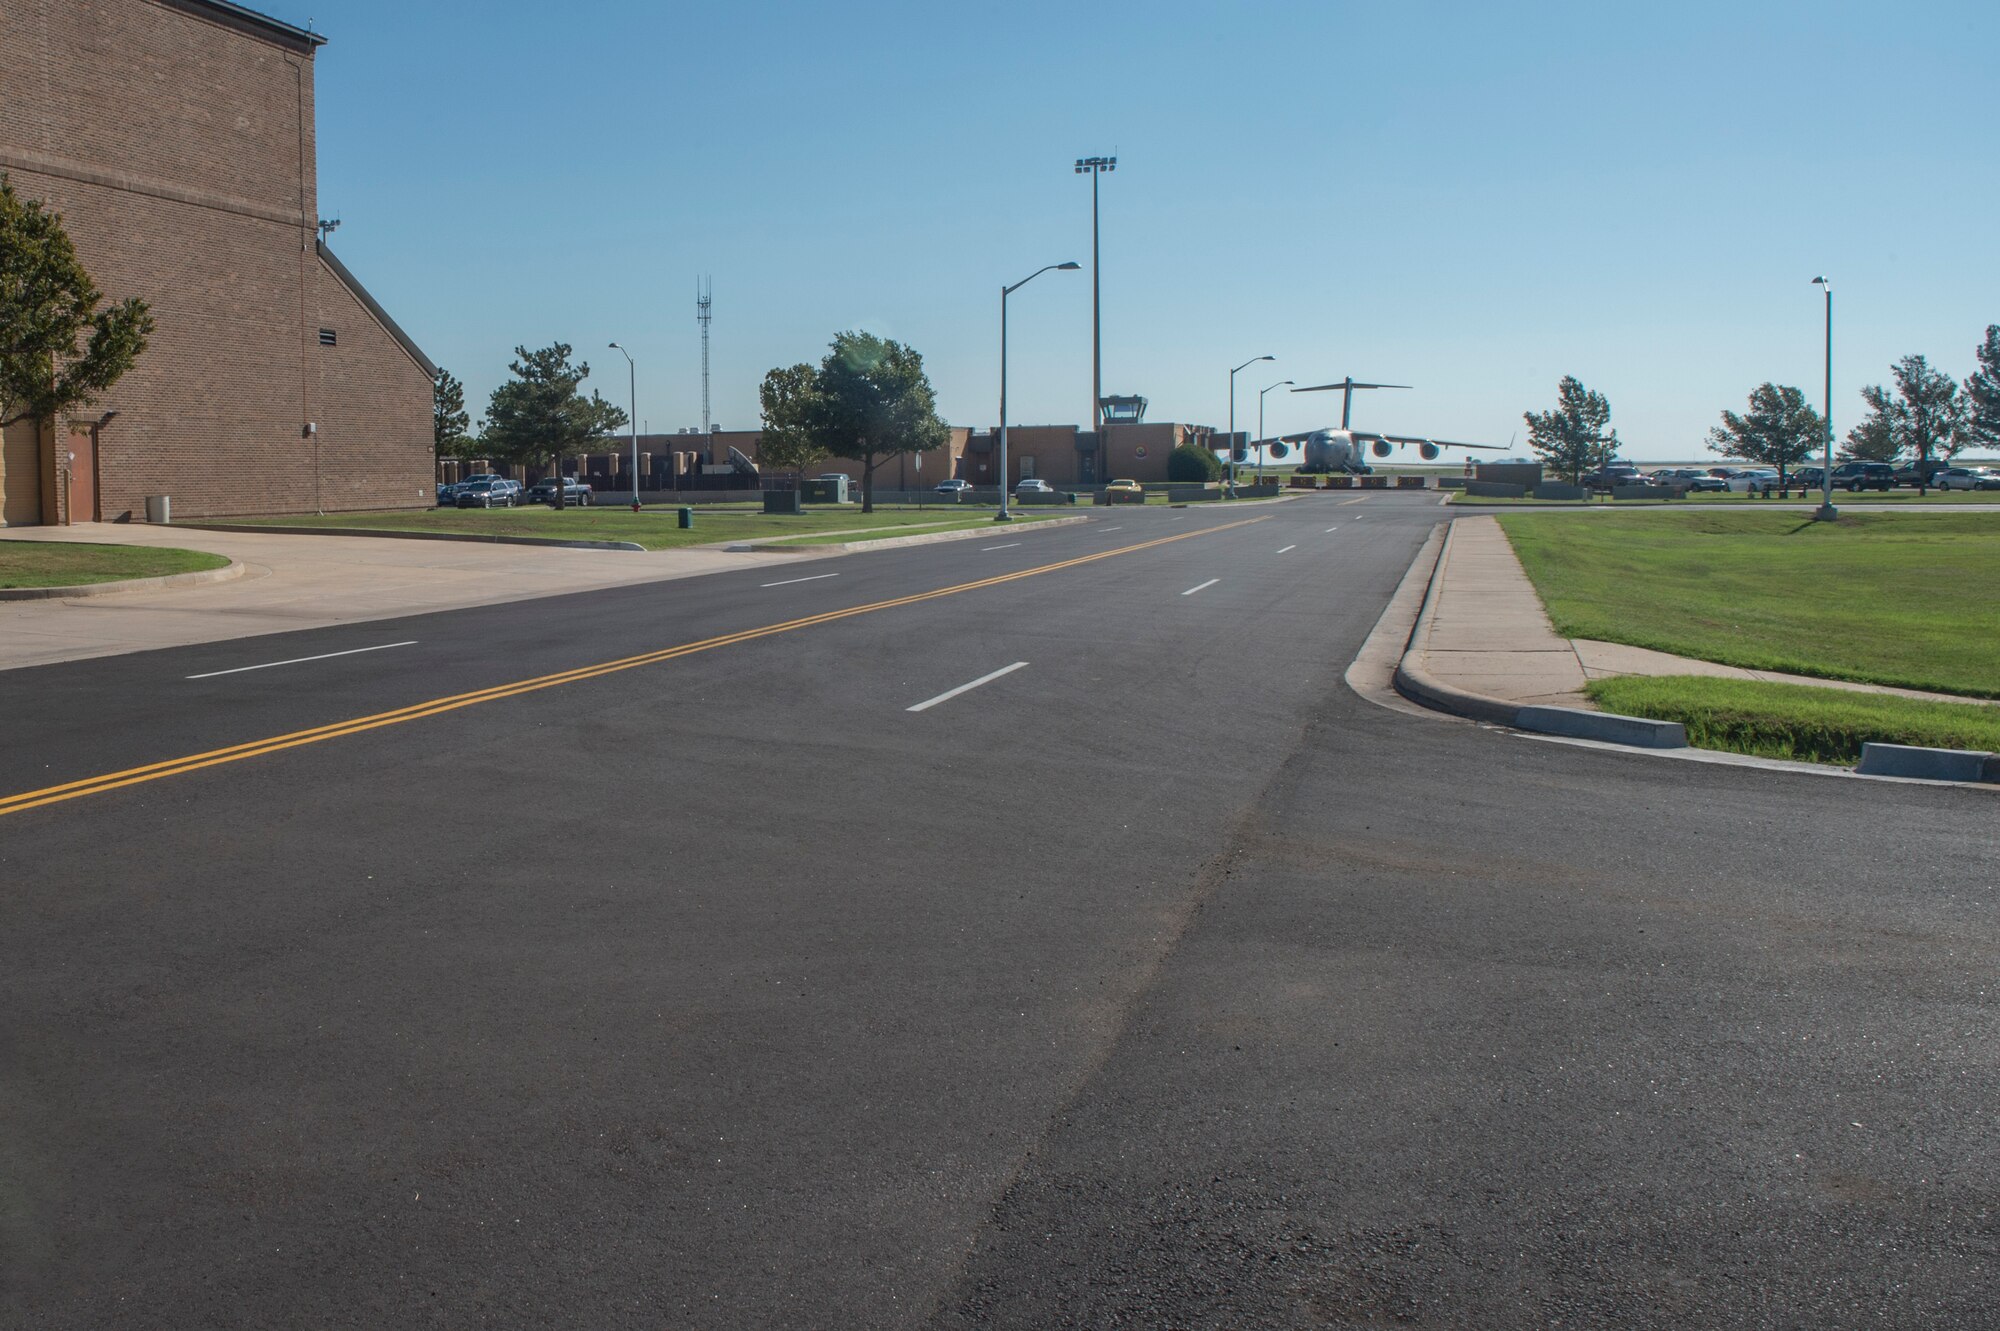 This is one of the newly built roads, which leads drivers to the flightline